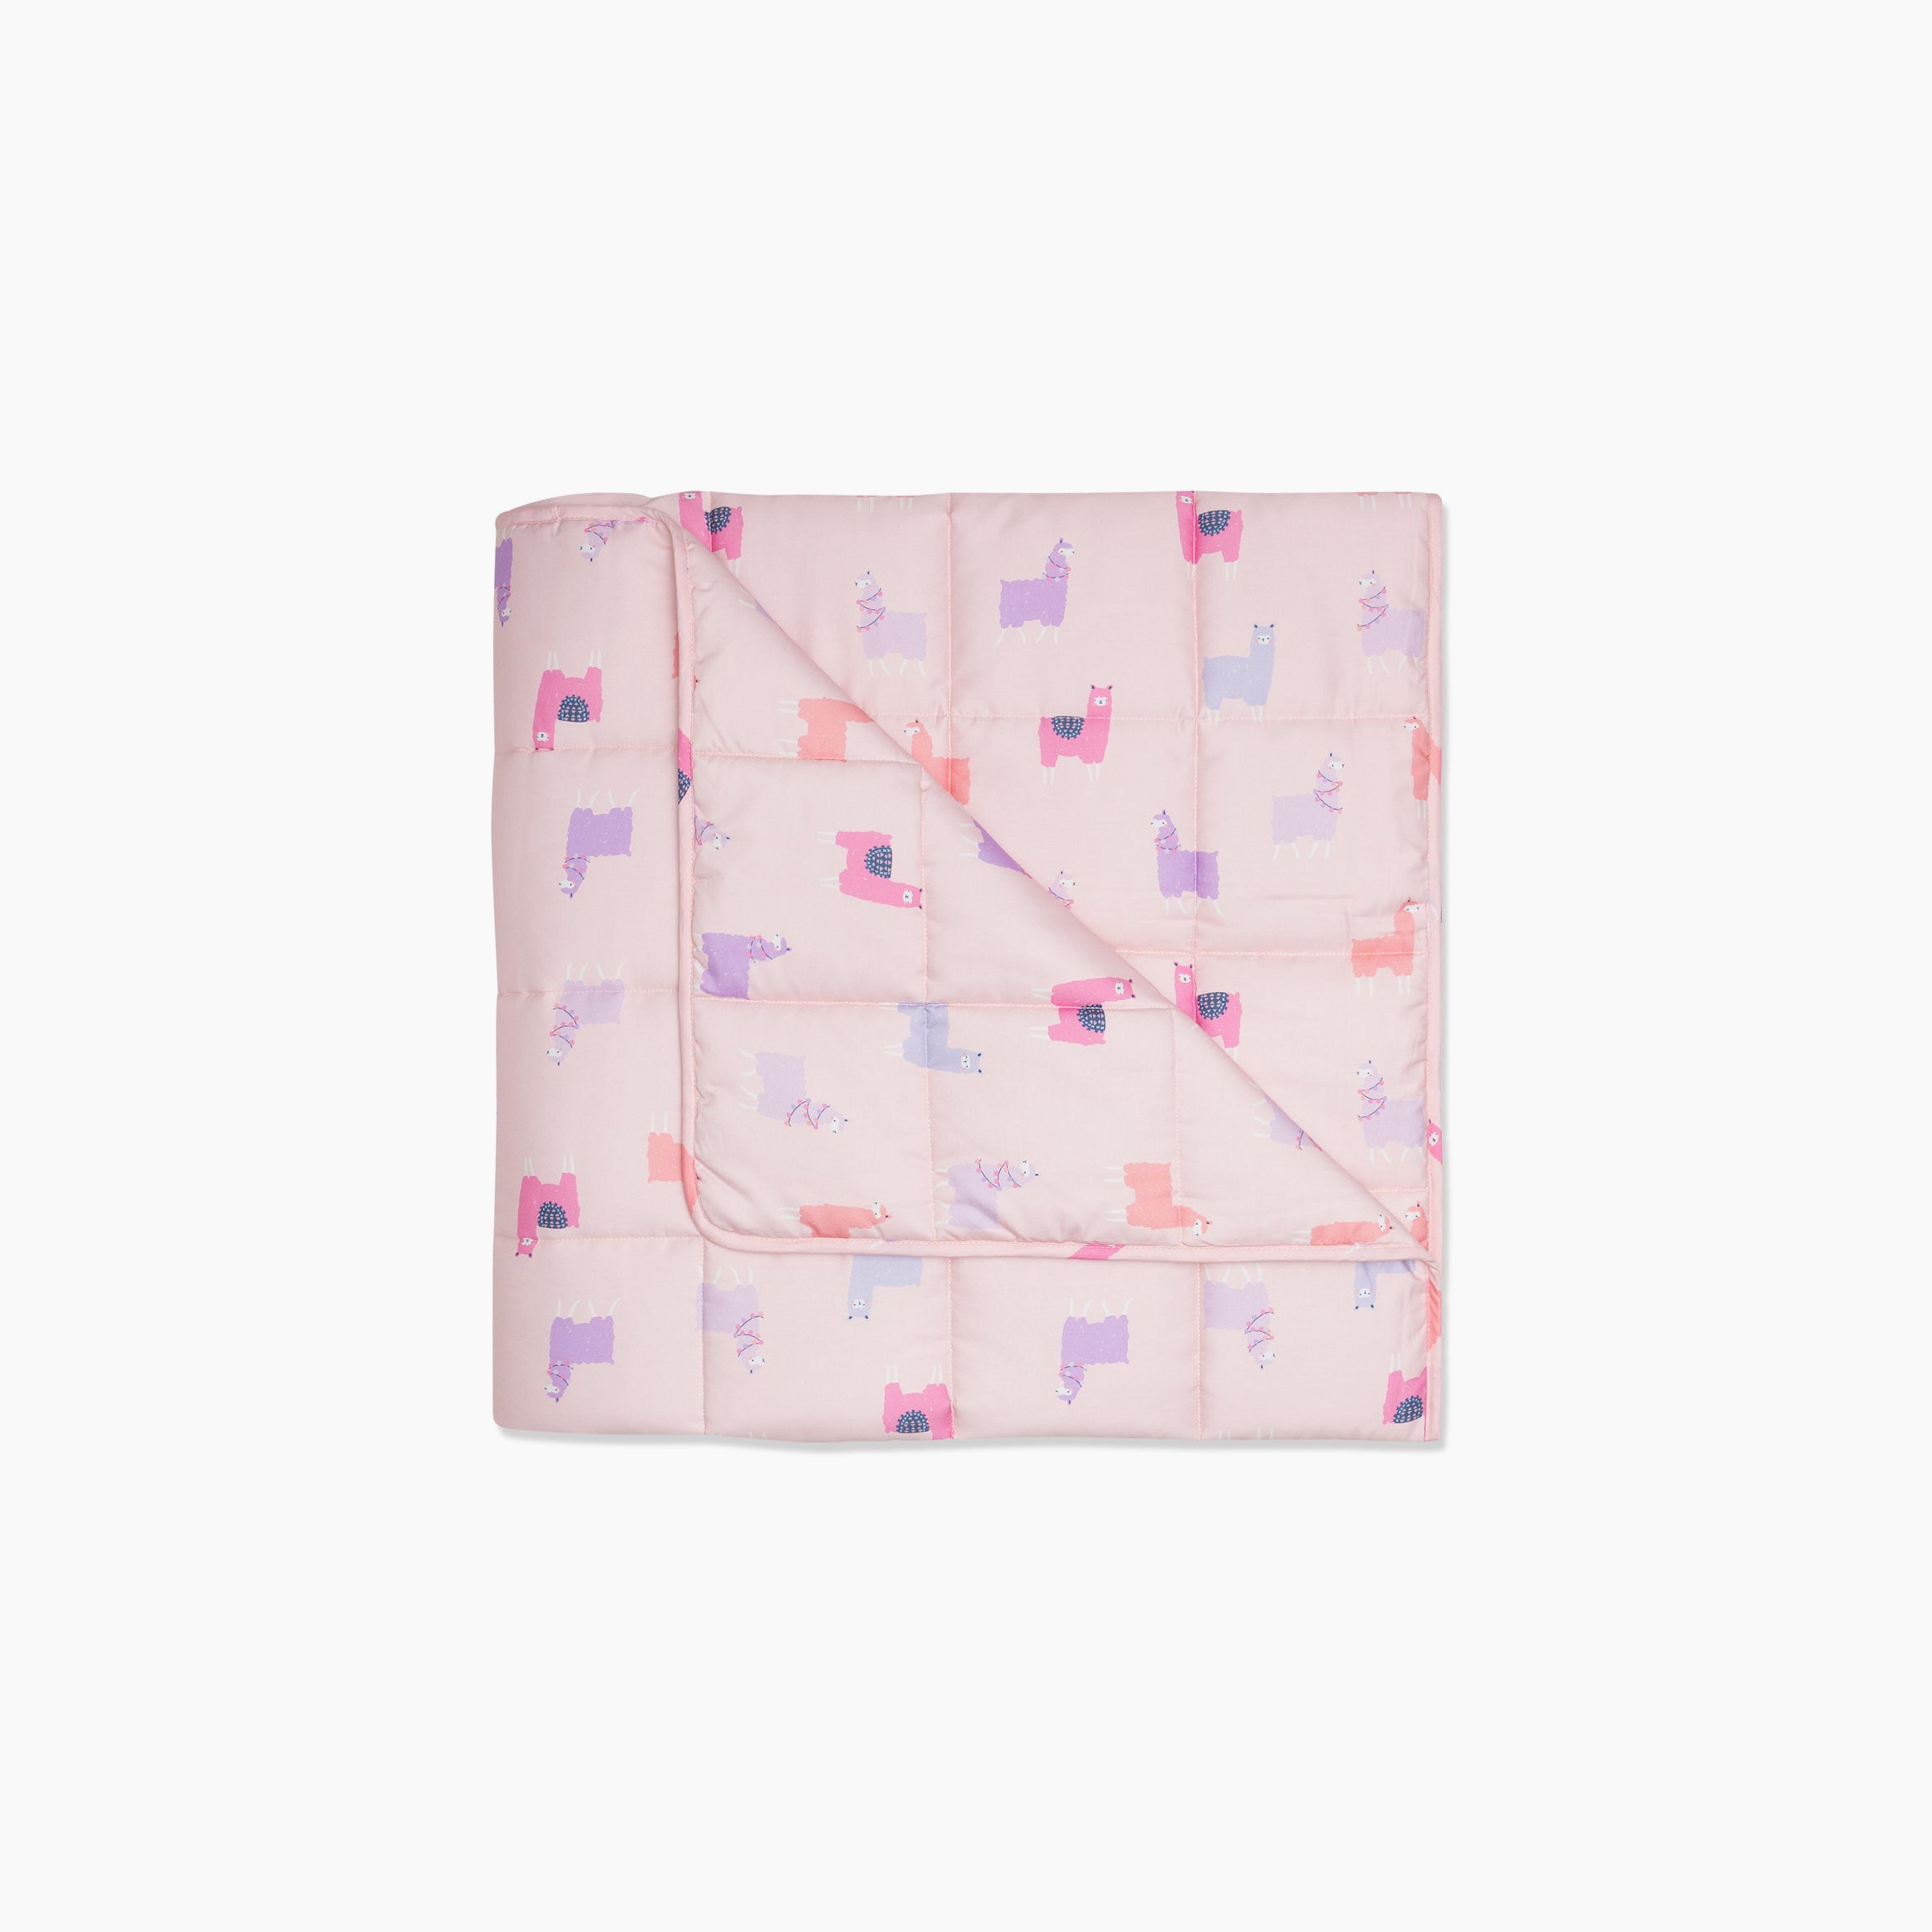 The "Dream Weaver" Kids Weighted Blanket